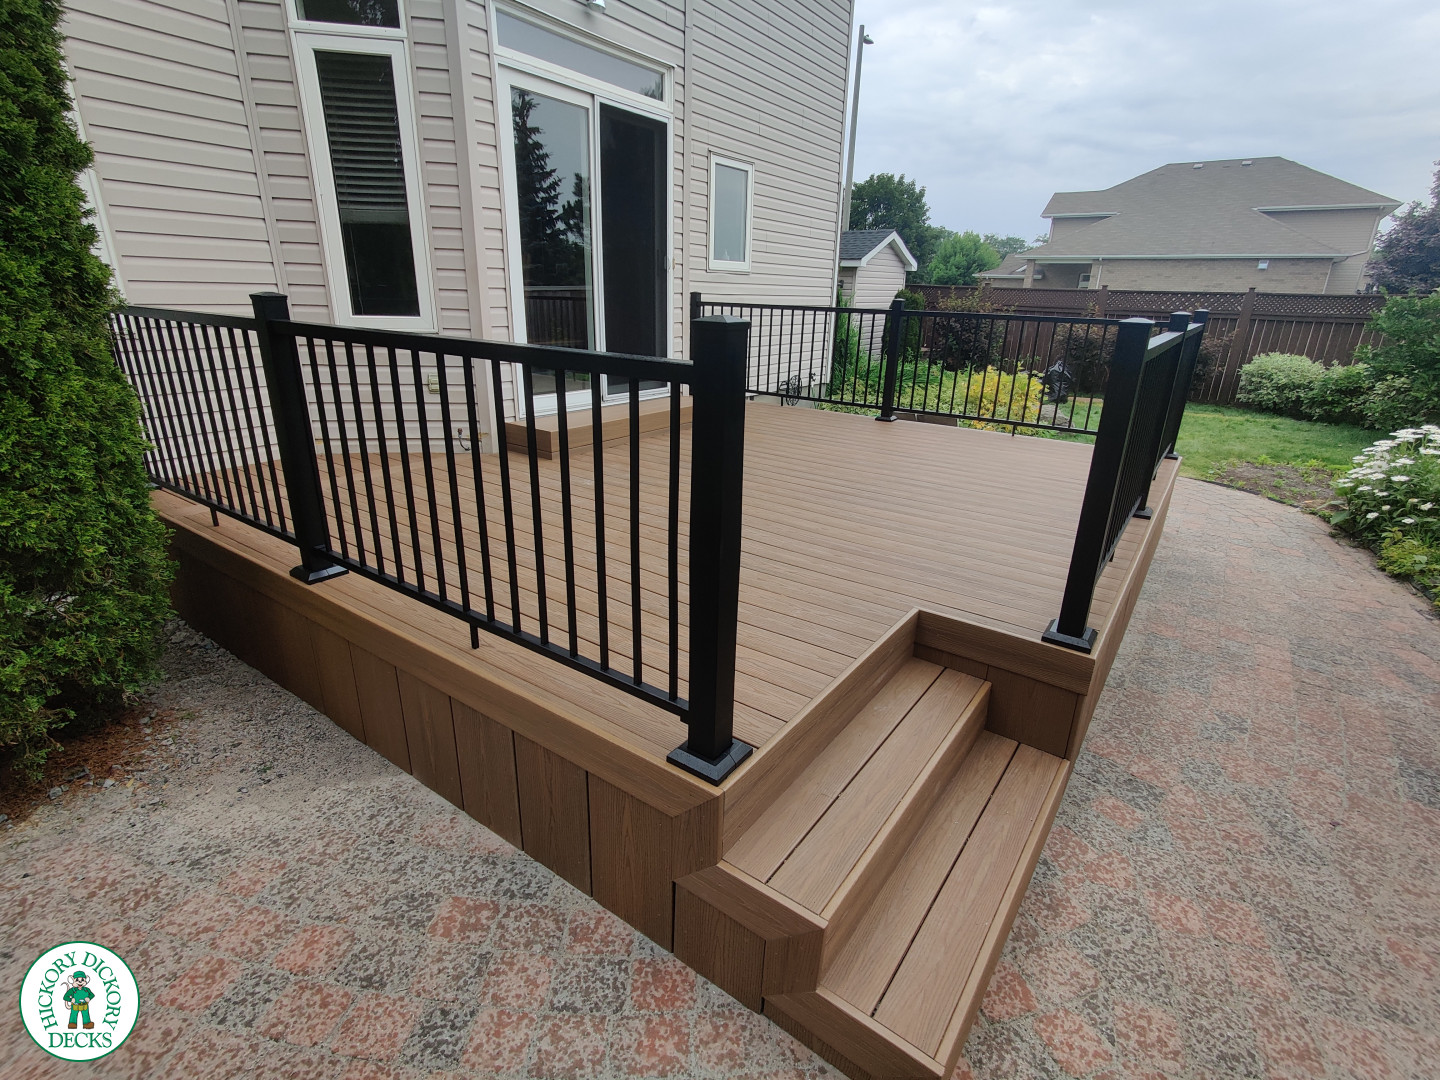 192 square foot fiberon in brown with three steps up to deck and black aluminum railing.